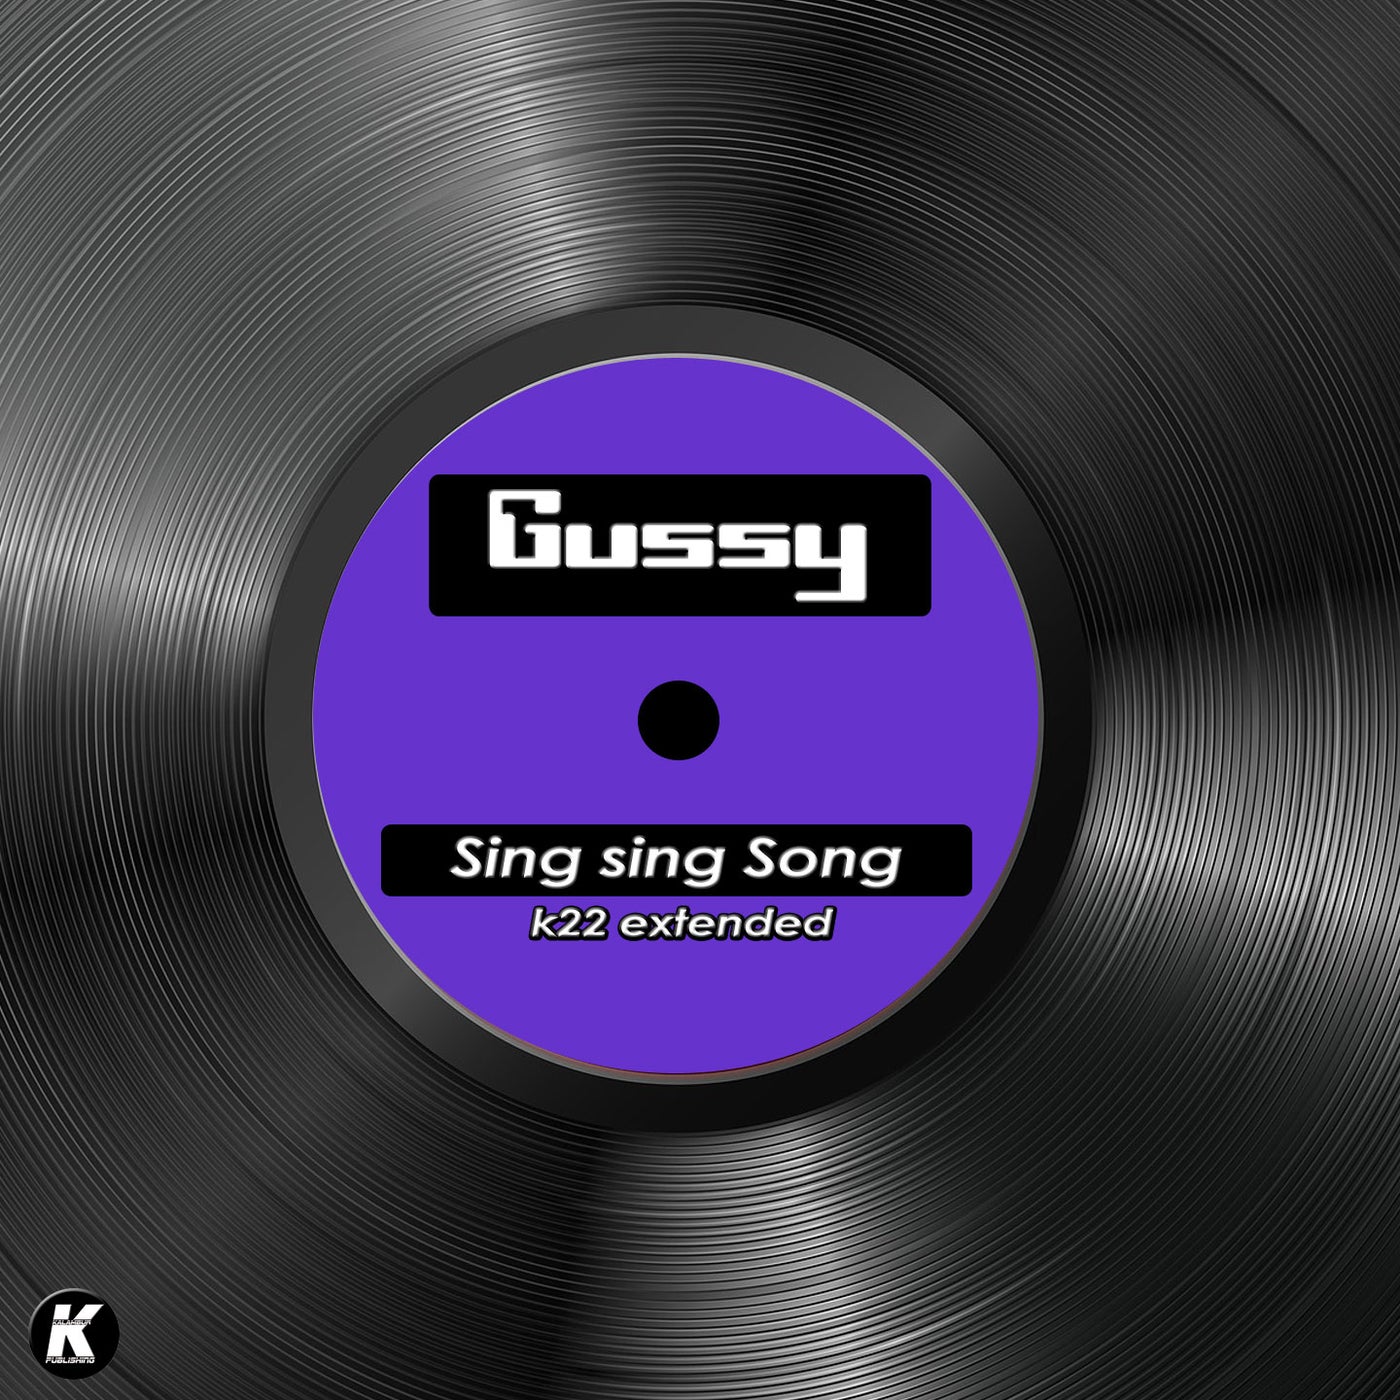 SING SING SONG (K22 extended)